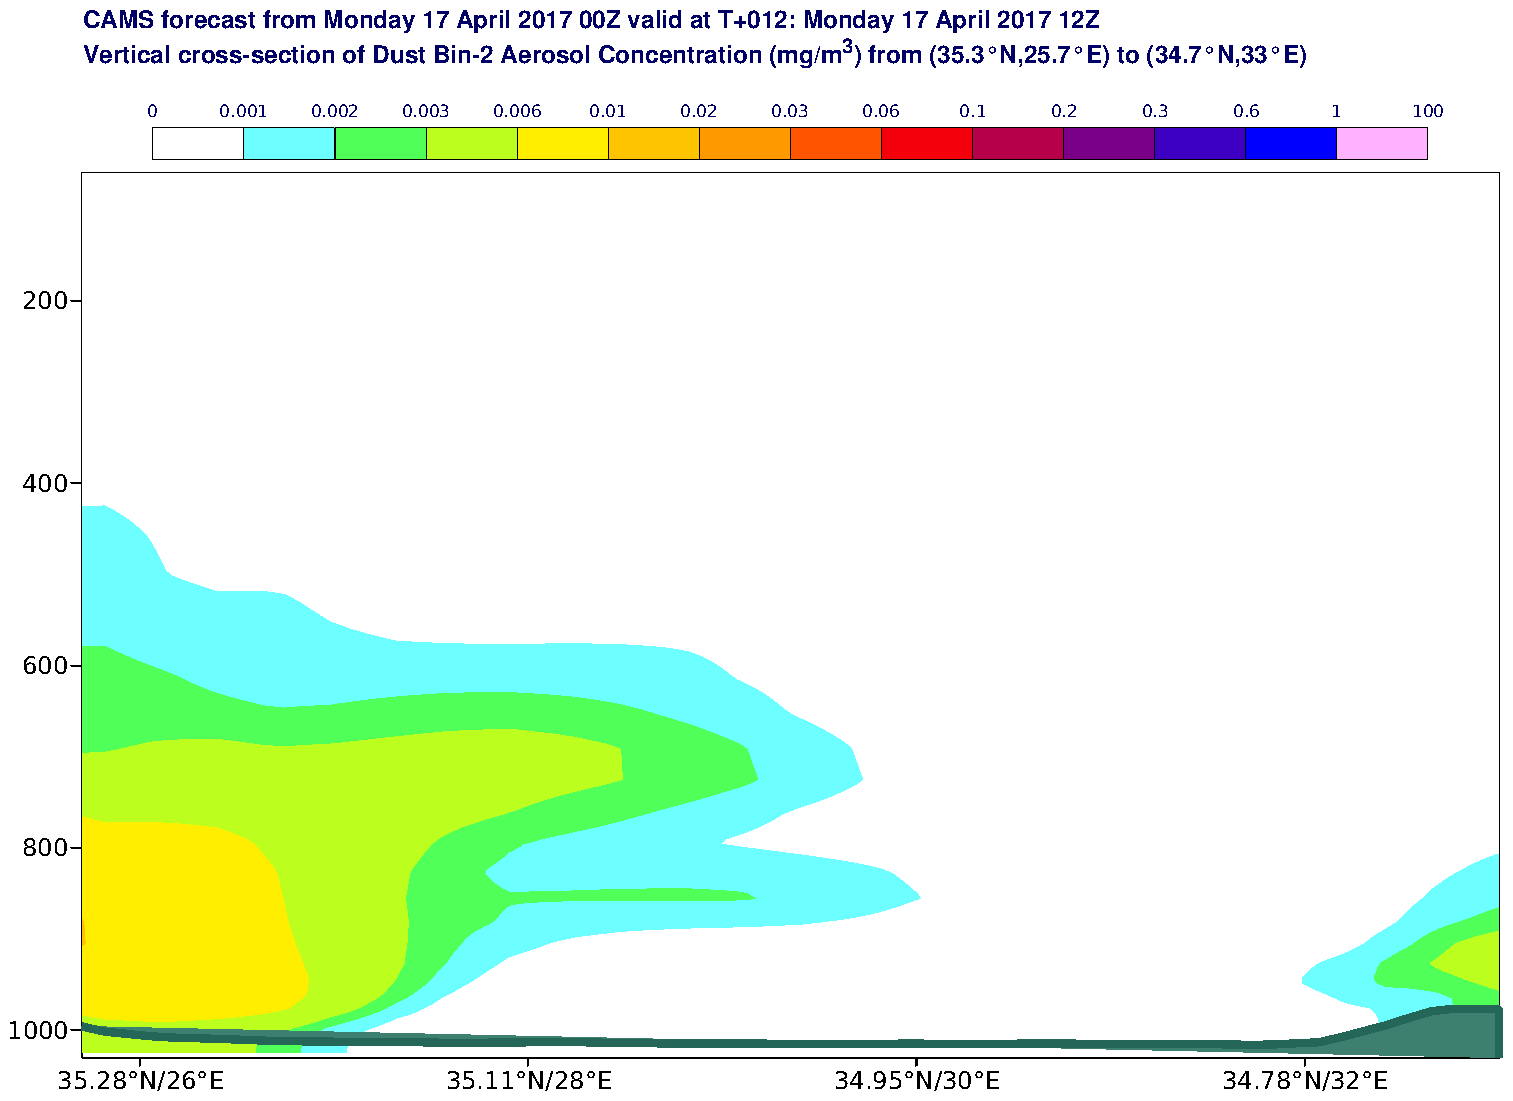 Vertical cross-section of Dust Bin-2 Aerosol Concentration (mg/m3) valid at T12 - 2017-04-17 12:00